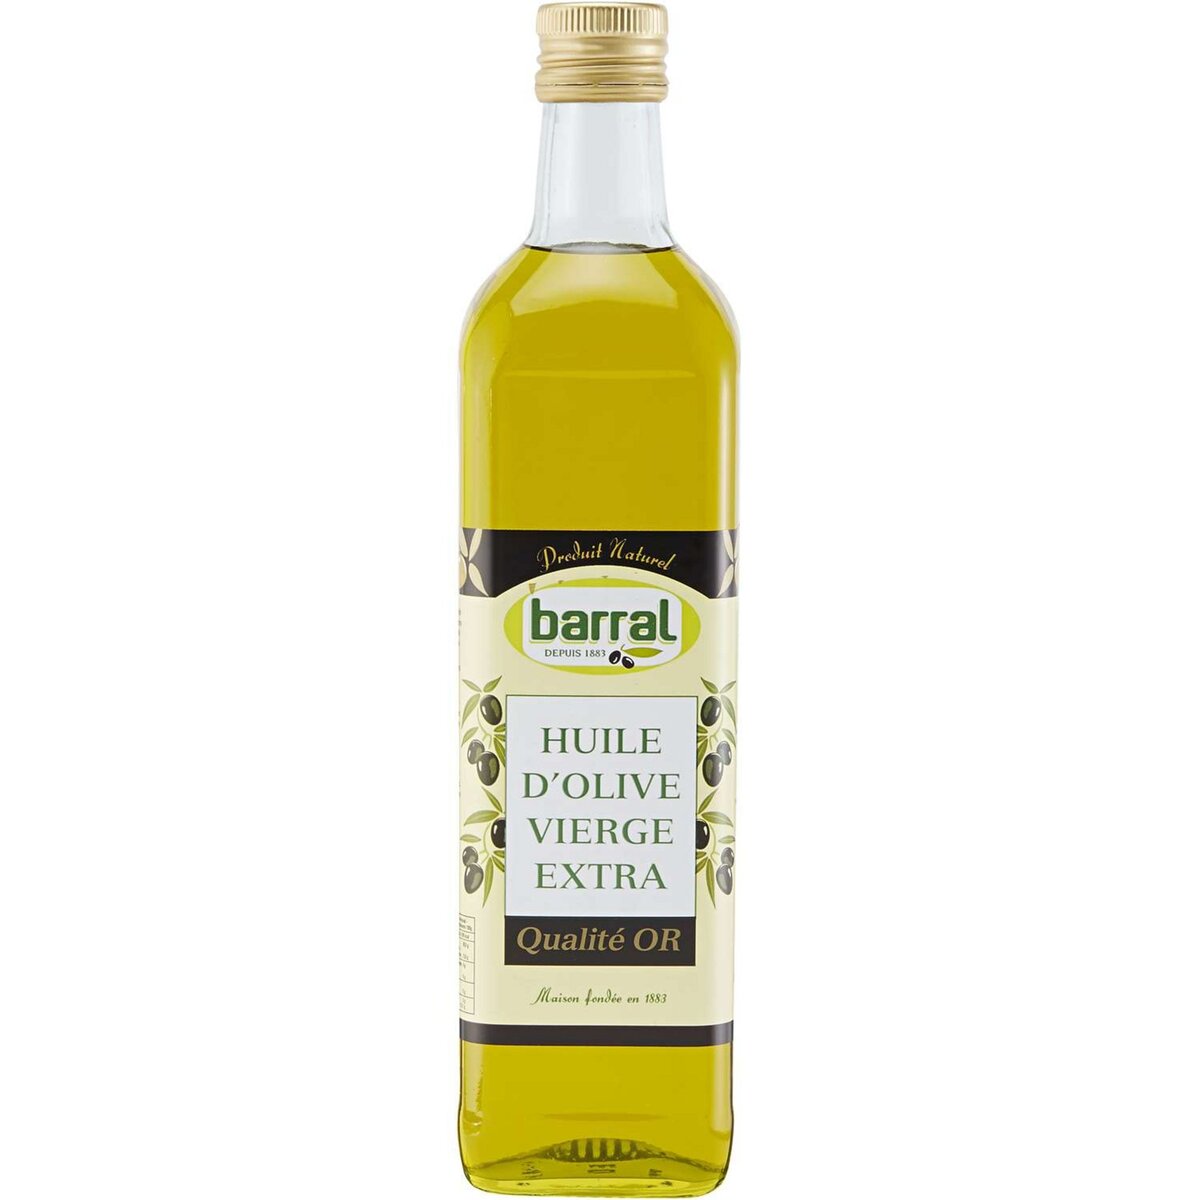 BARRAL Barral Barral huile vierge extra qualité or 75cl 75cl